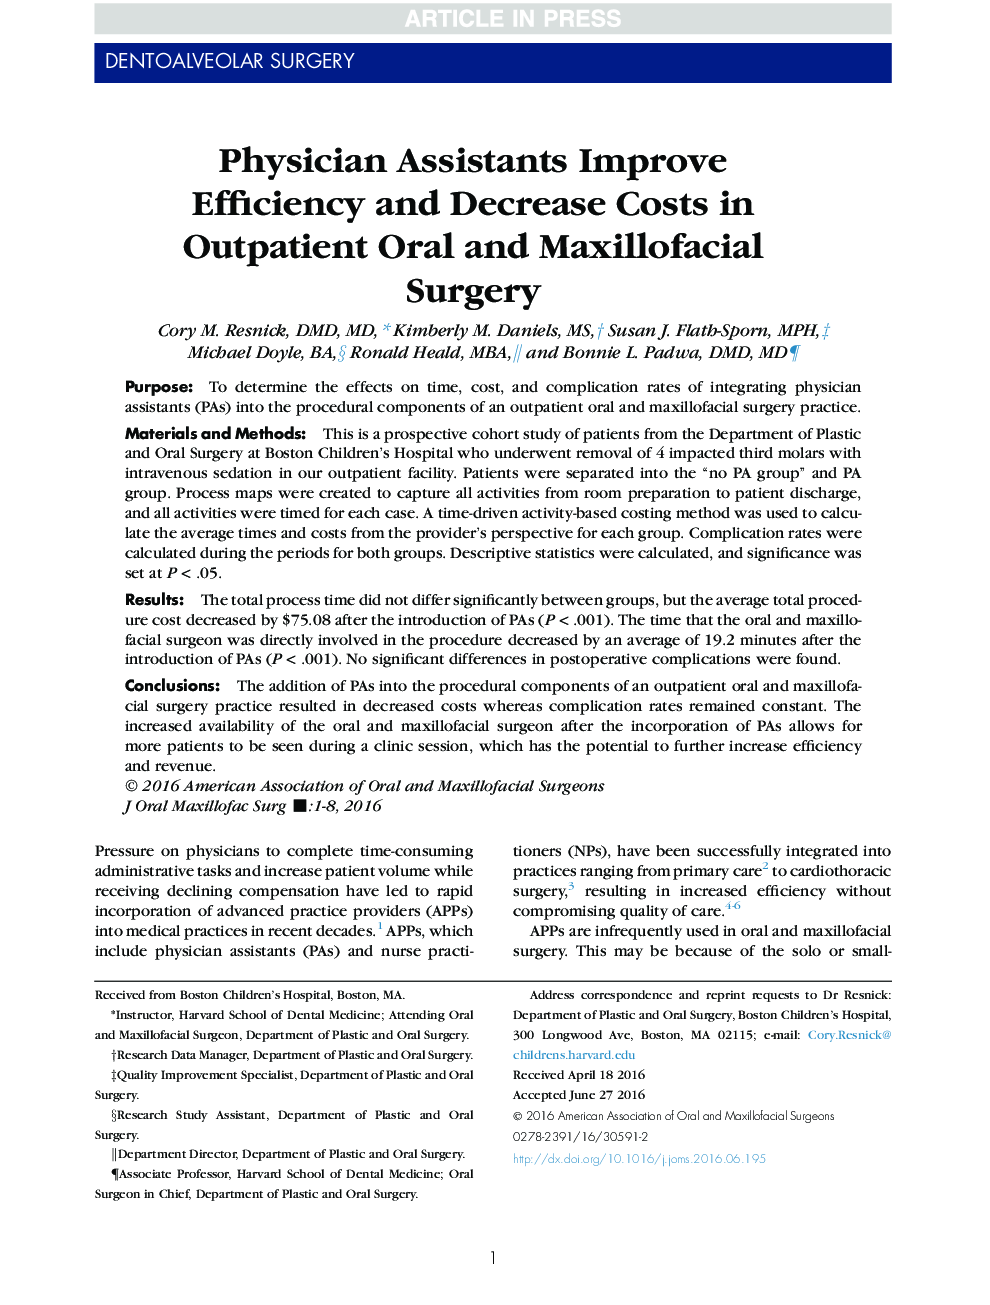 Physician Assistants Improve Efficiency and Decrease Costs in Outpatient Oral and Maxillofacial Surgery